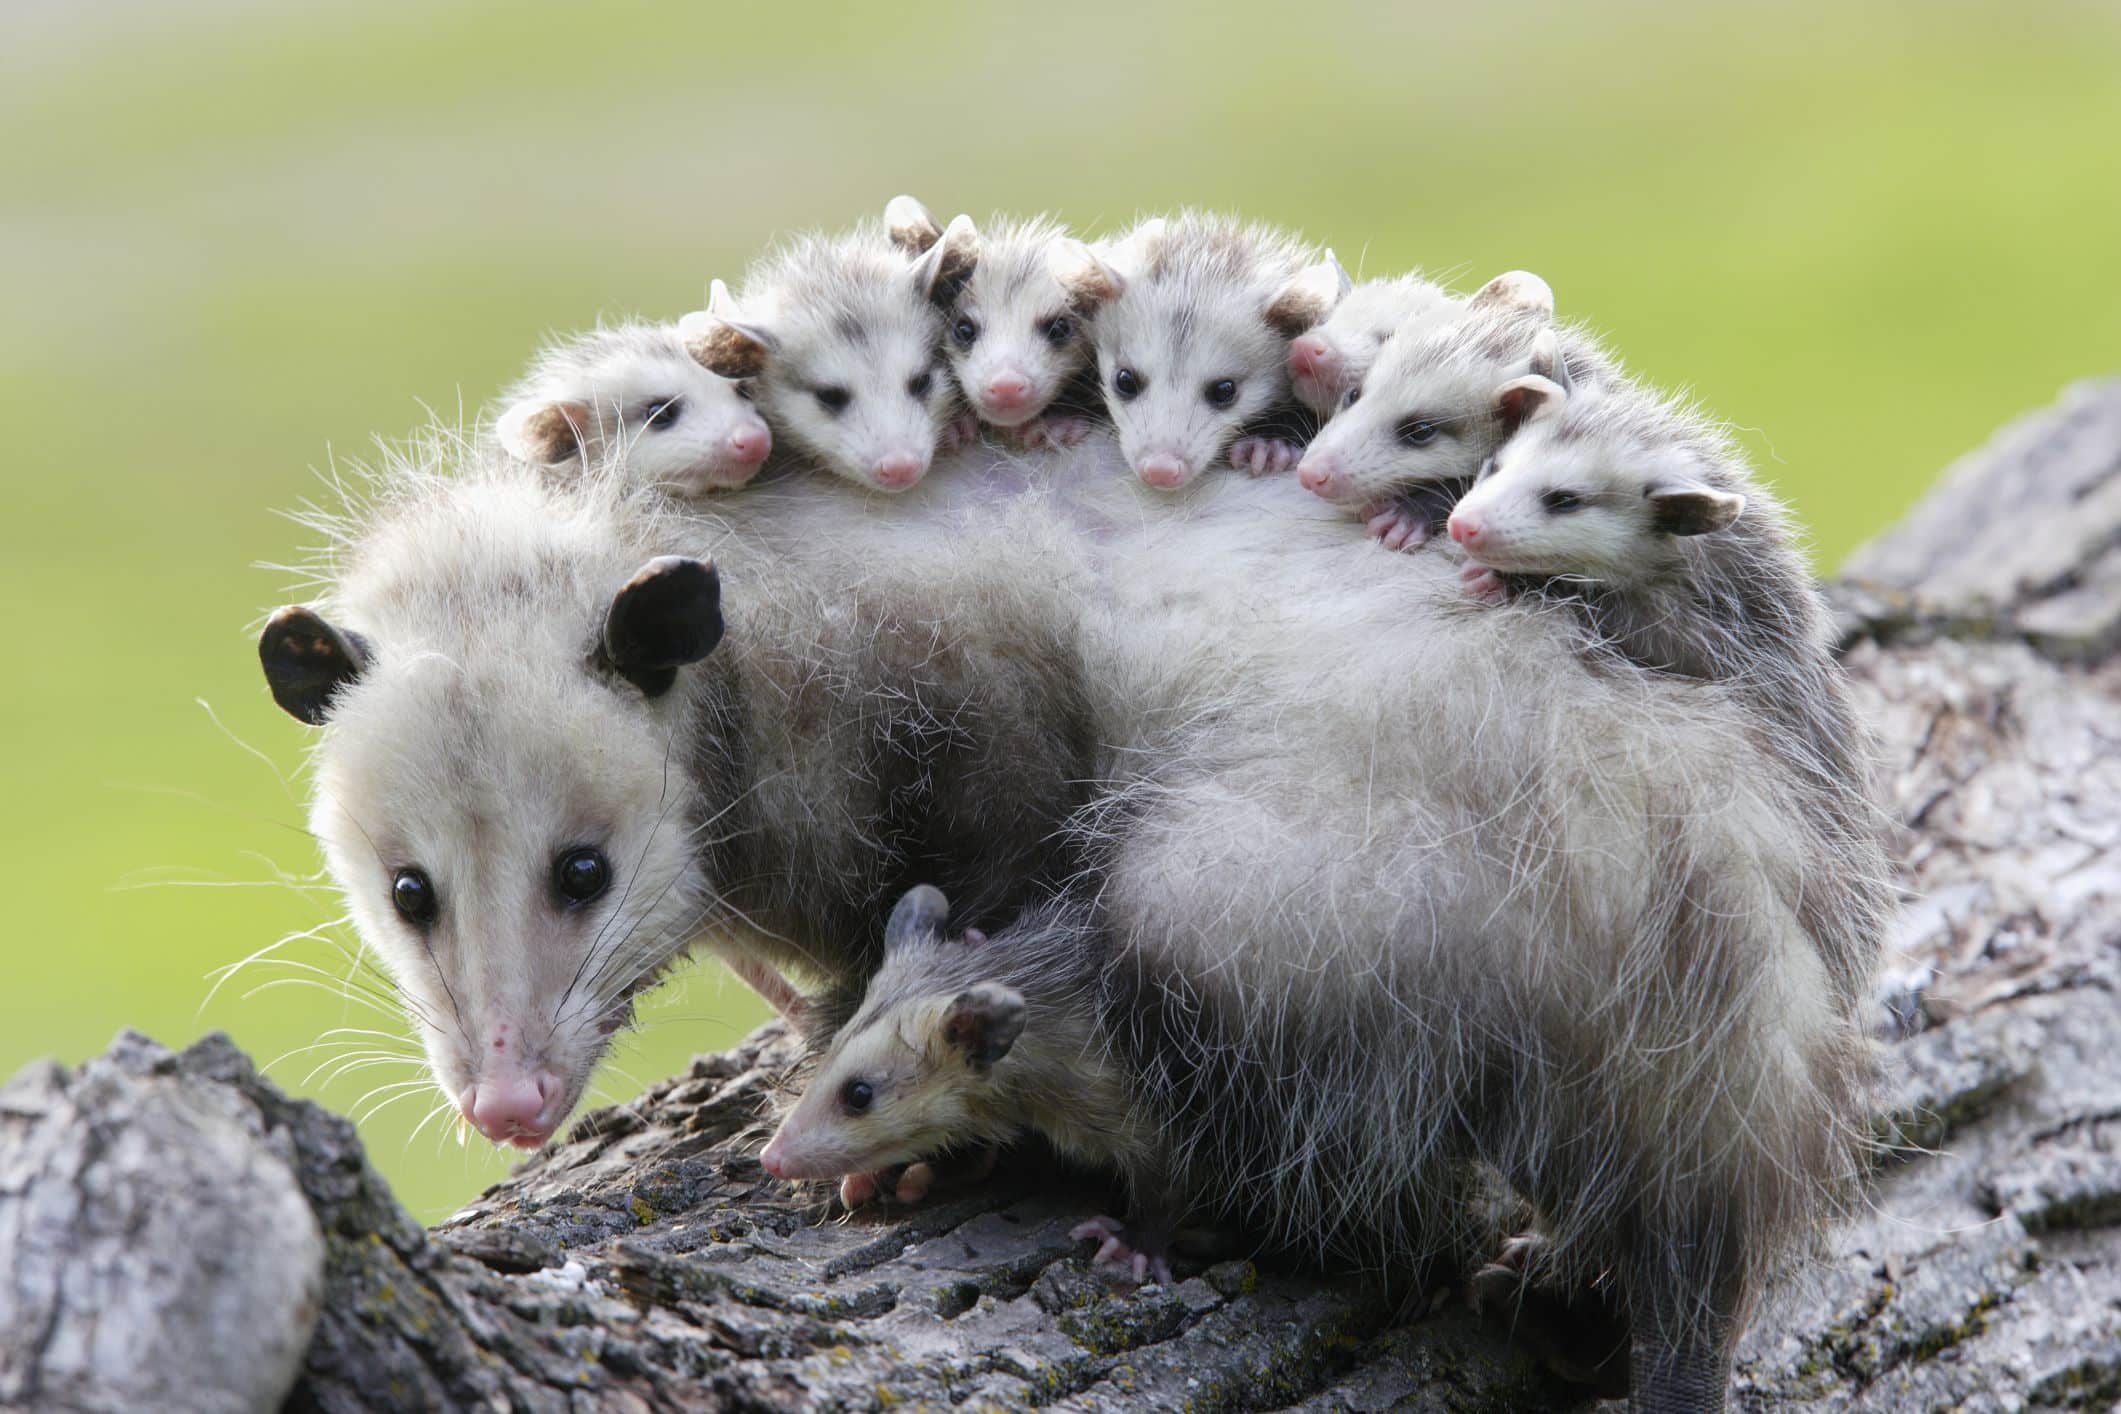 How To Get Rid of Opossums / Possums